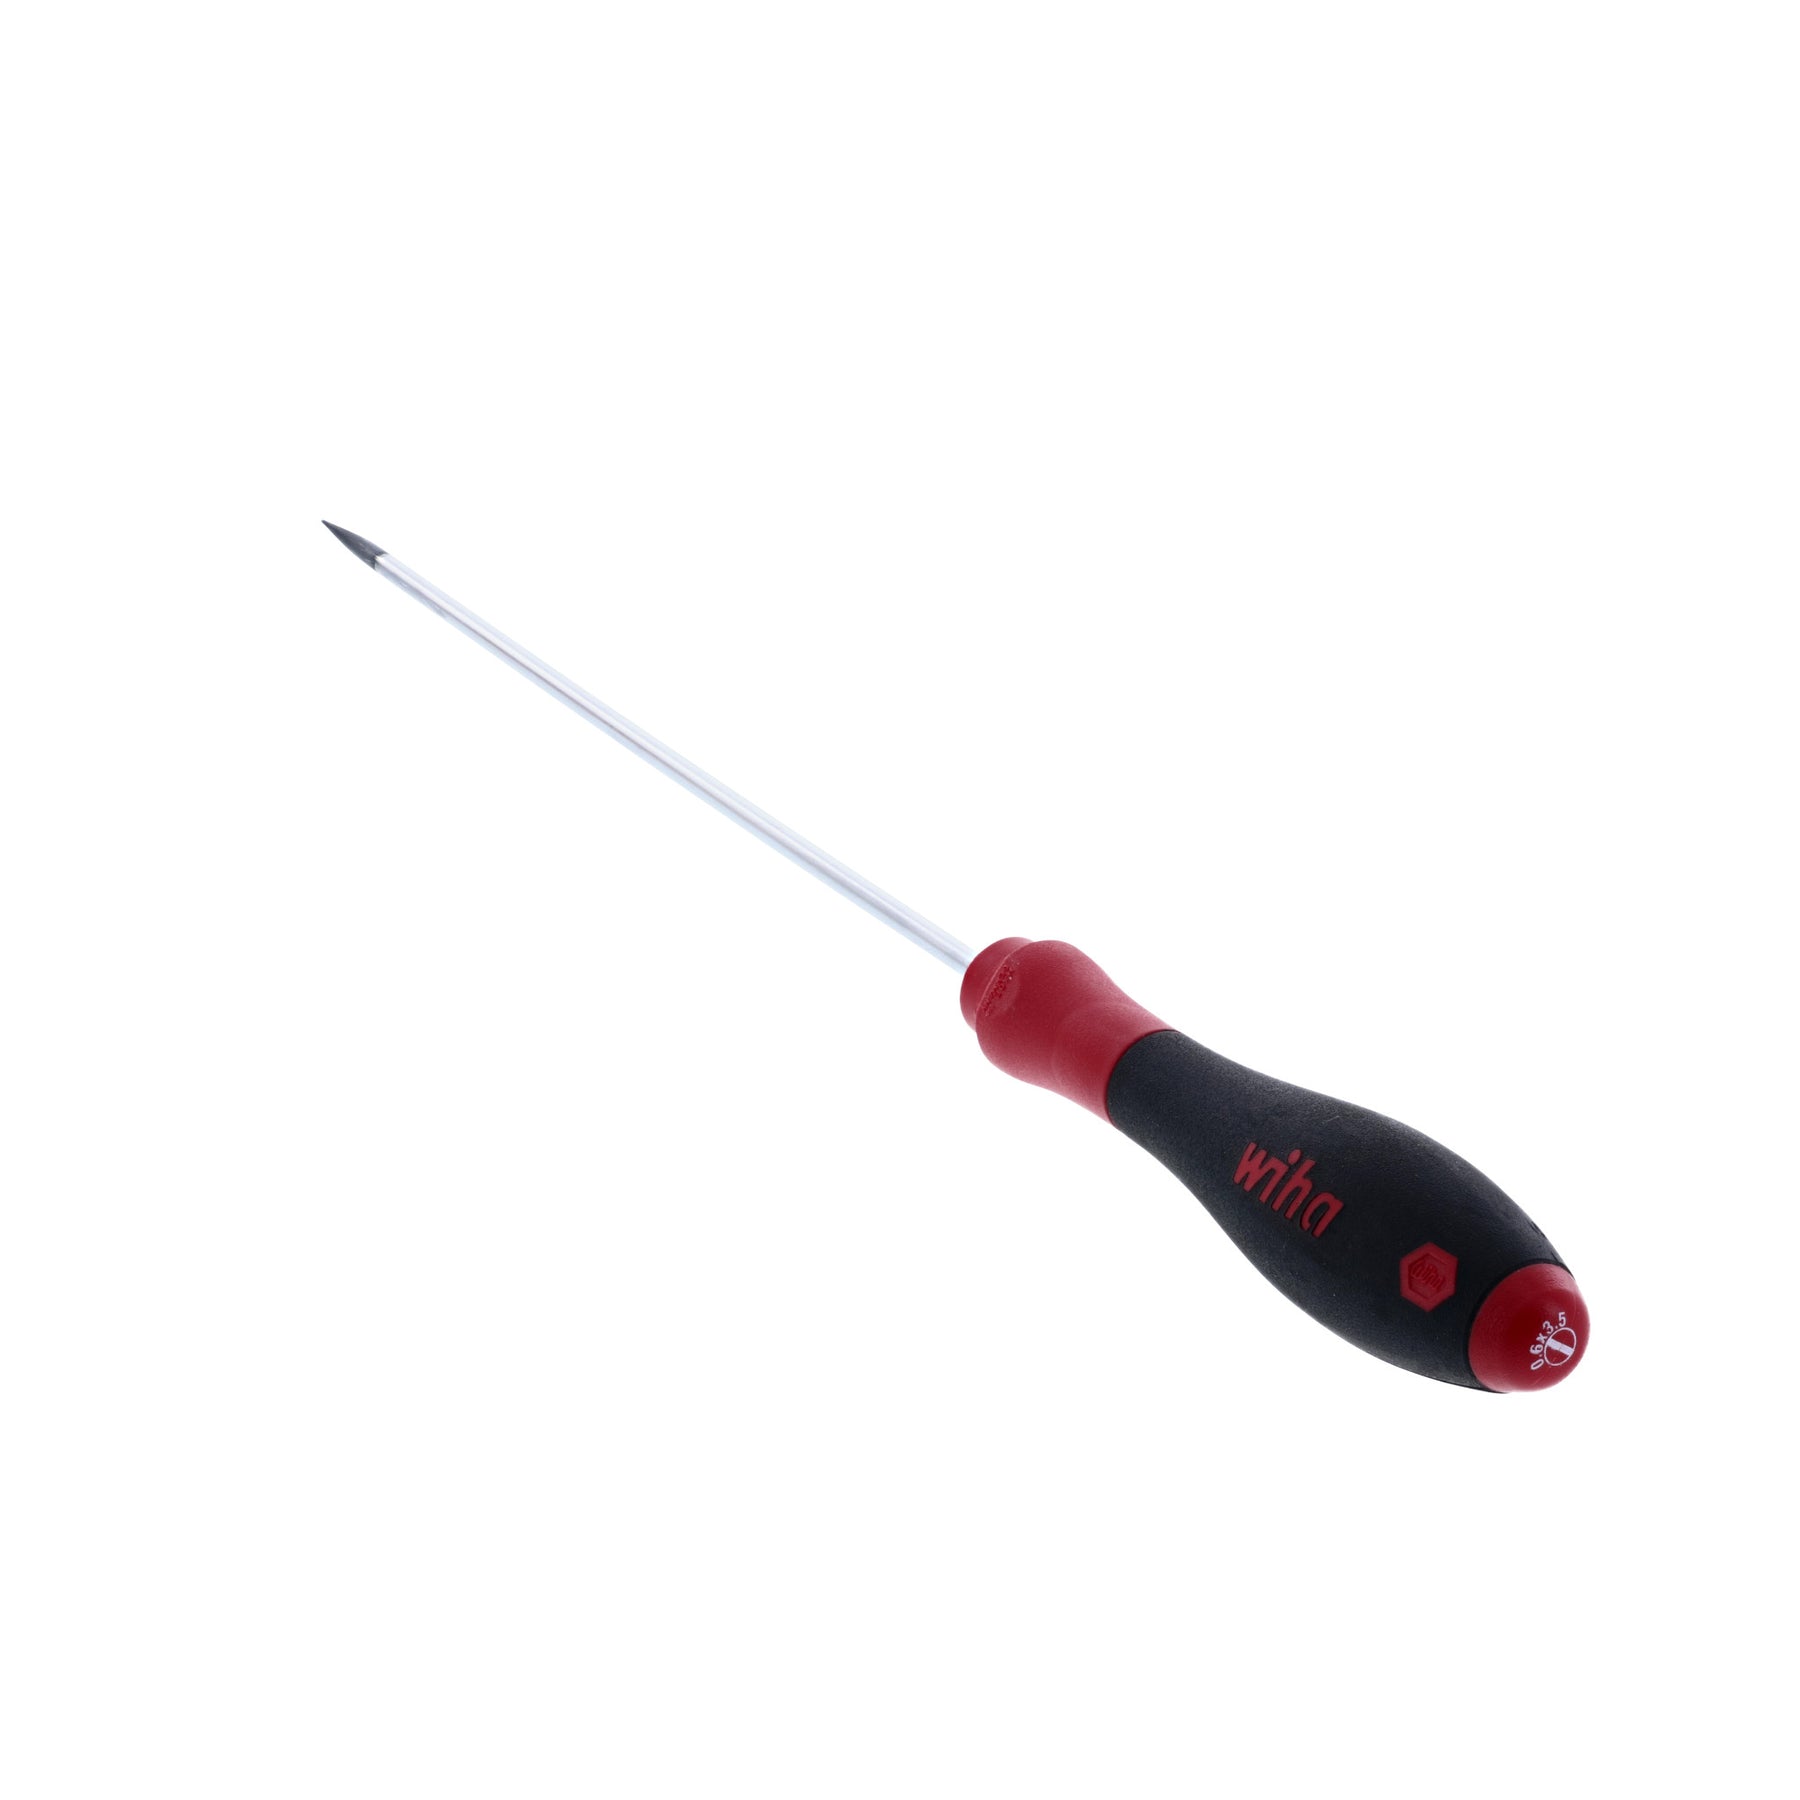 SoftFinish Slotted Screwdriver 3.5mm x 200mm